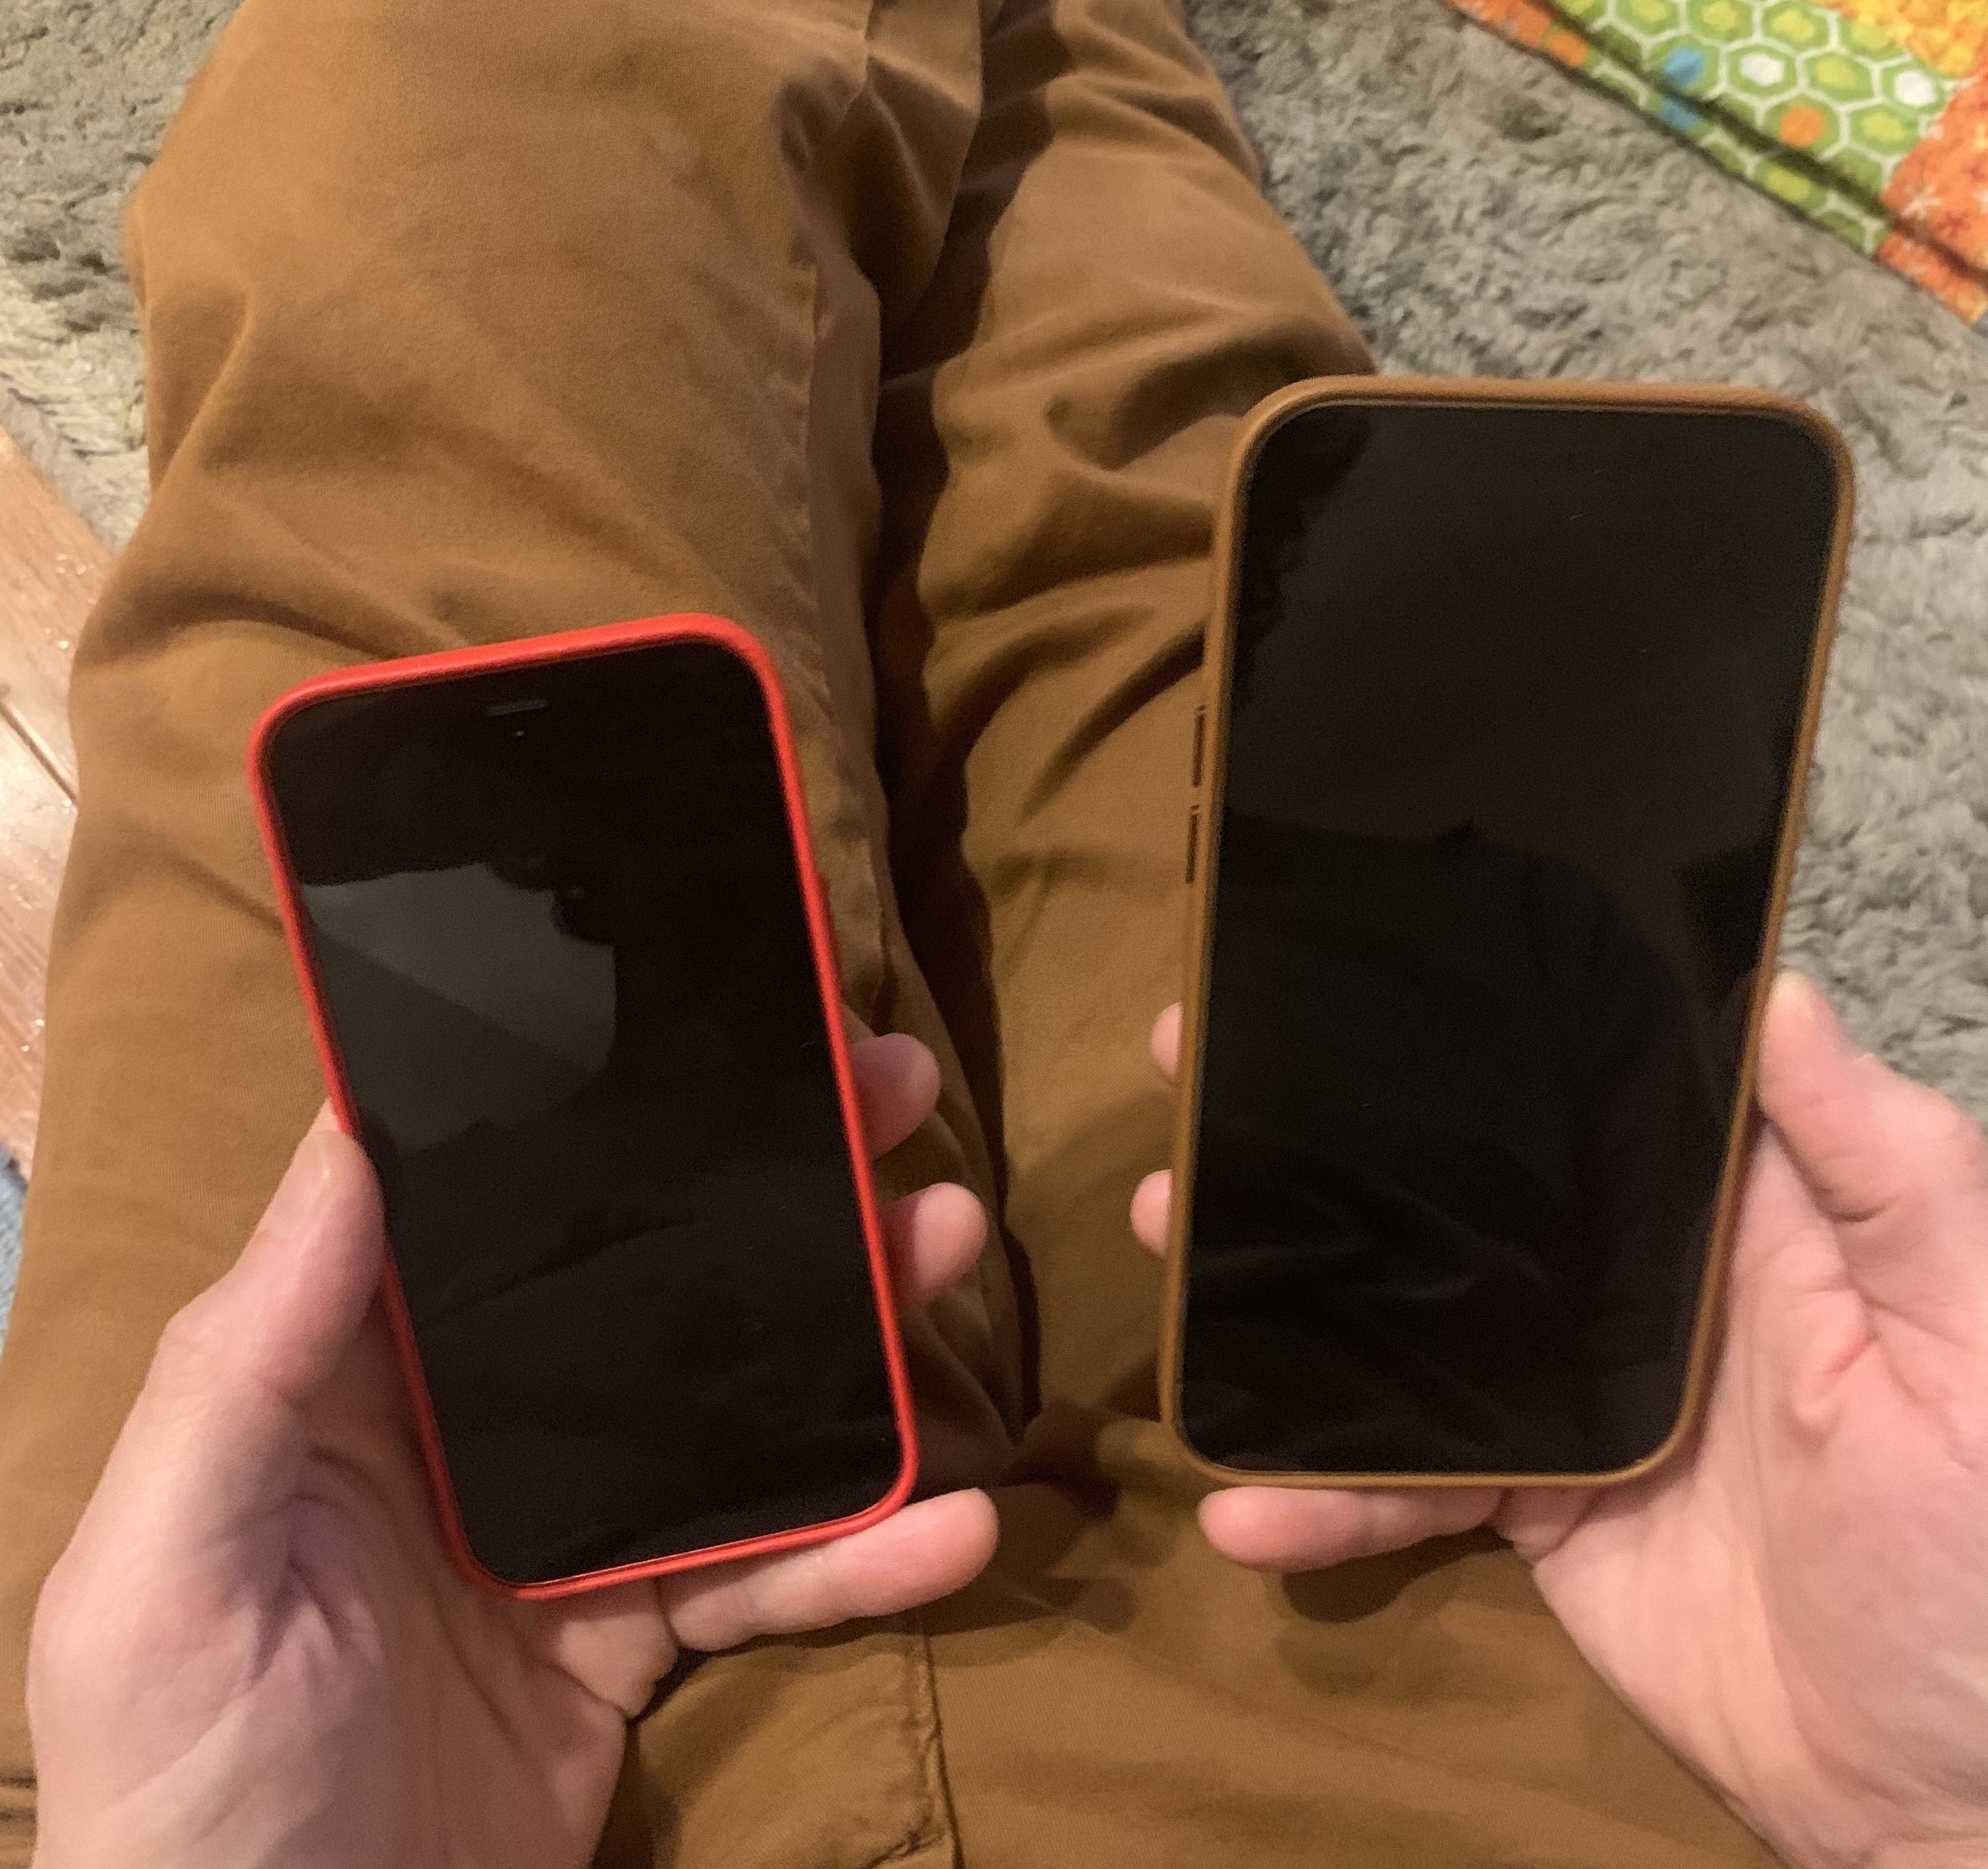 Hands on: iPhone 12 Pro Max in the real world